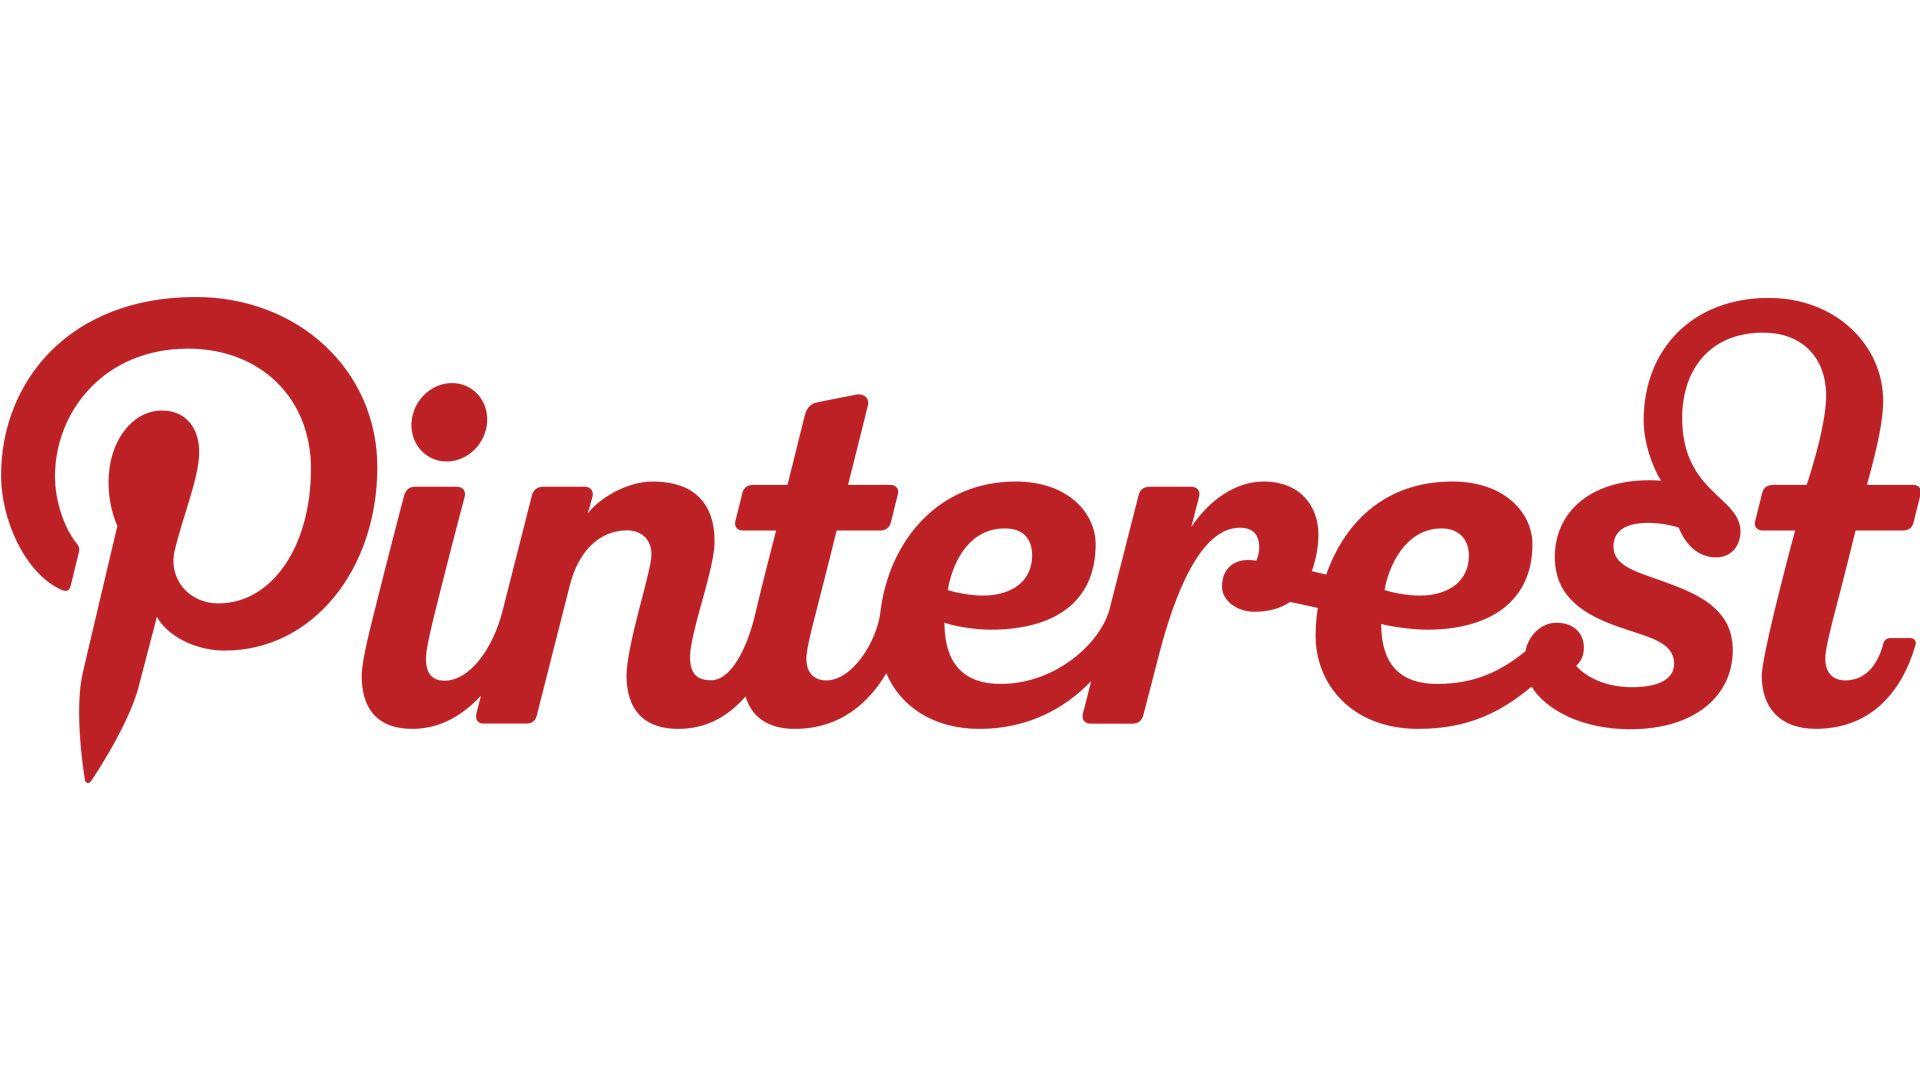 Pinterest App Logo - Pinterest Logo, Pinterest Symbol, Meaning, History and Evolution